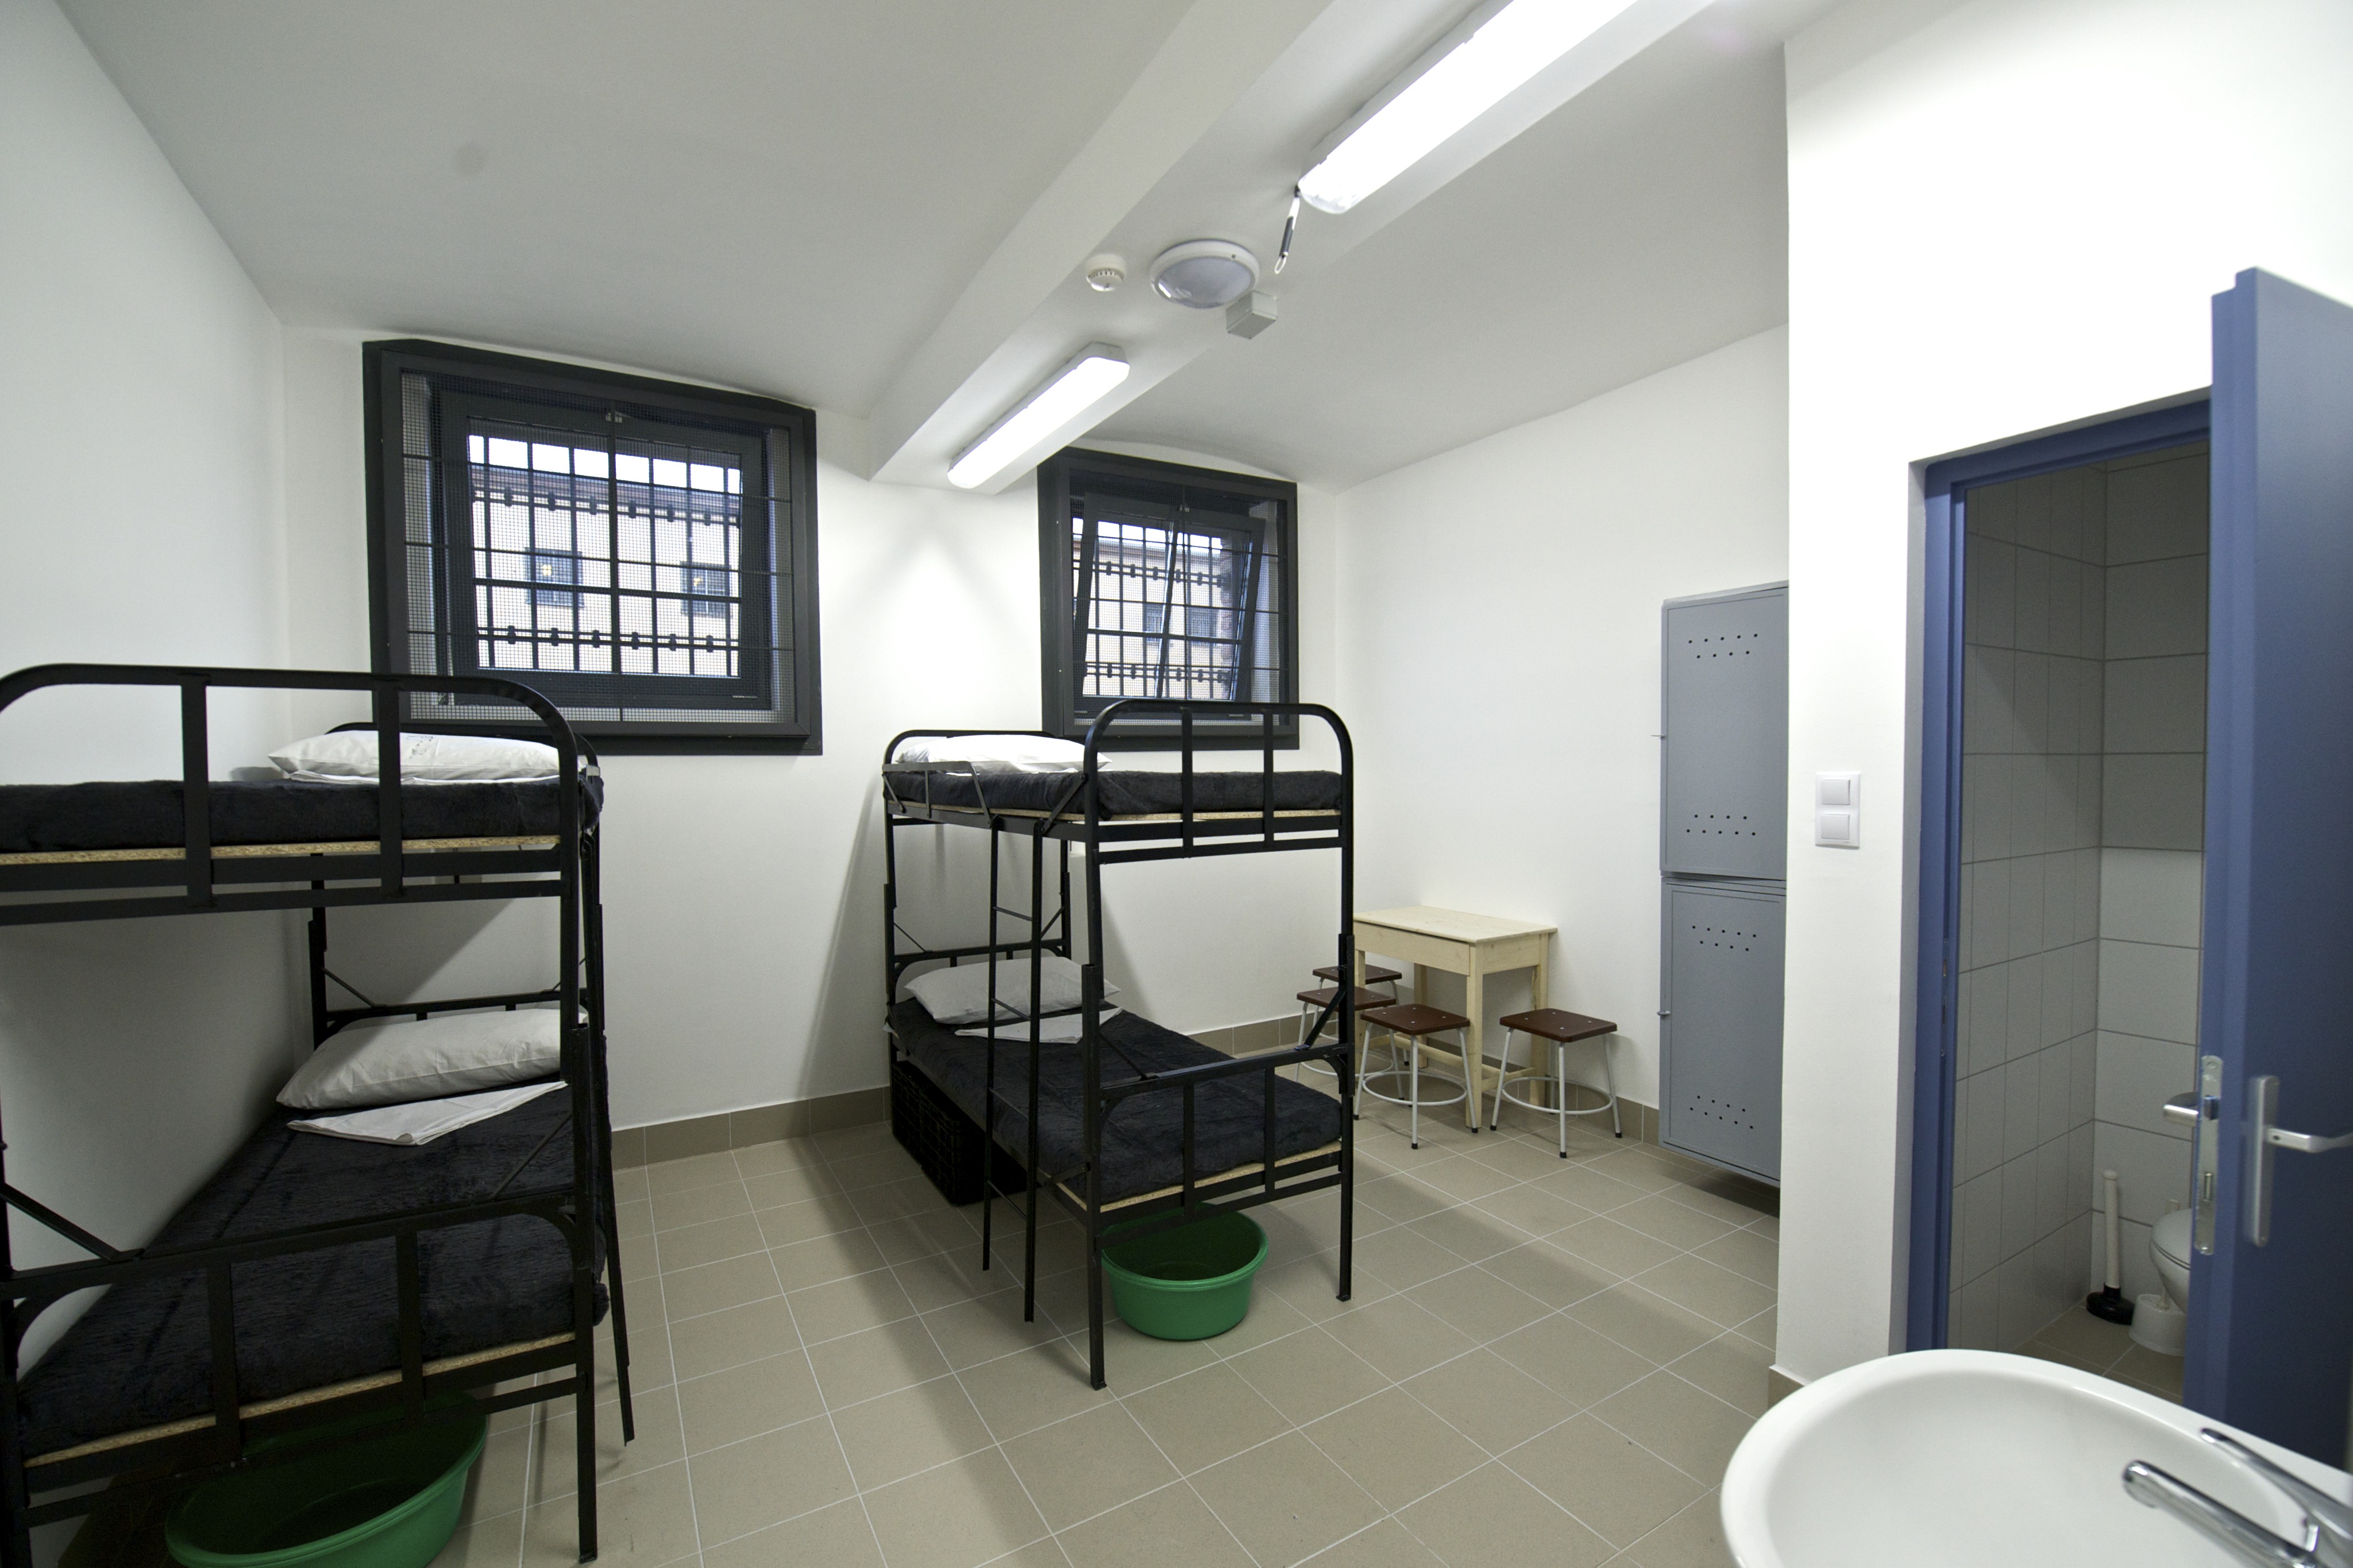 ”Excellent Accommodation of Inmates